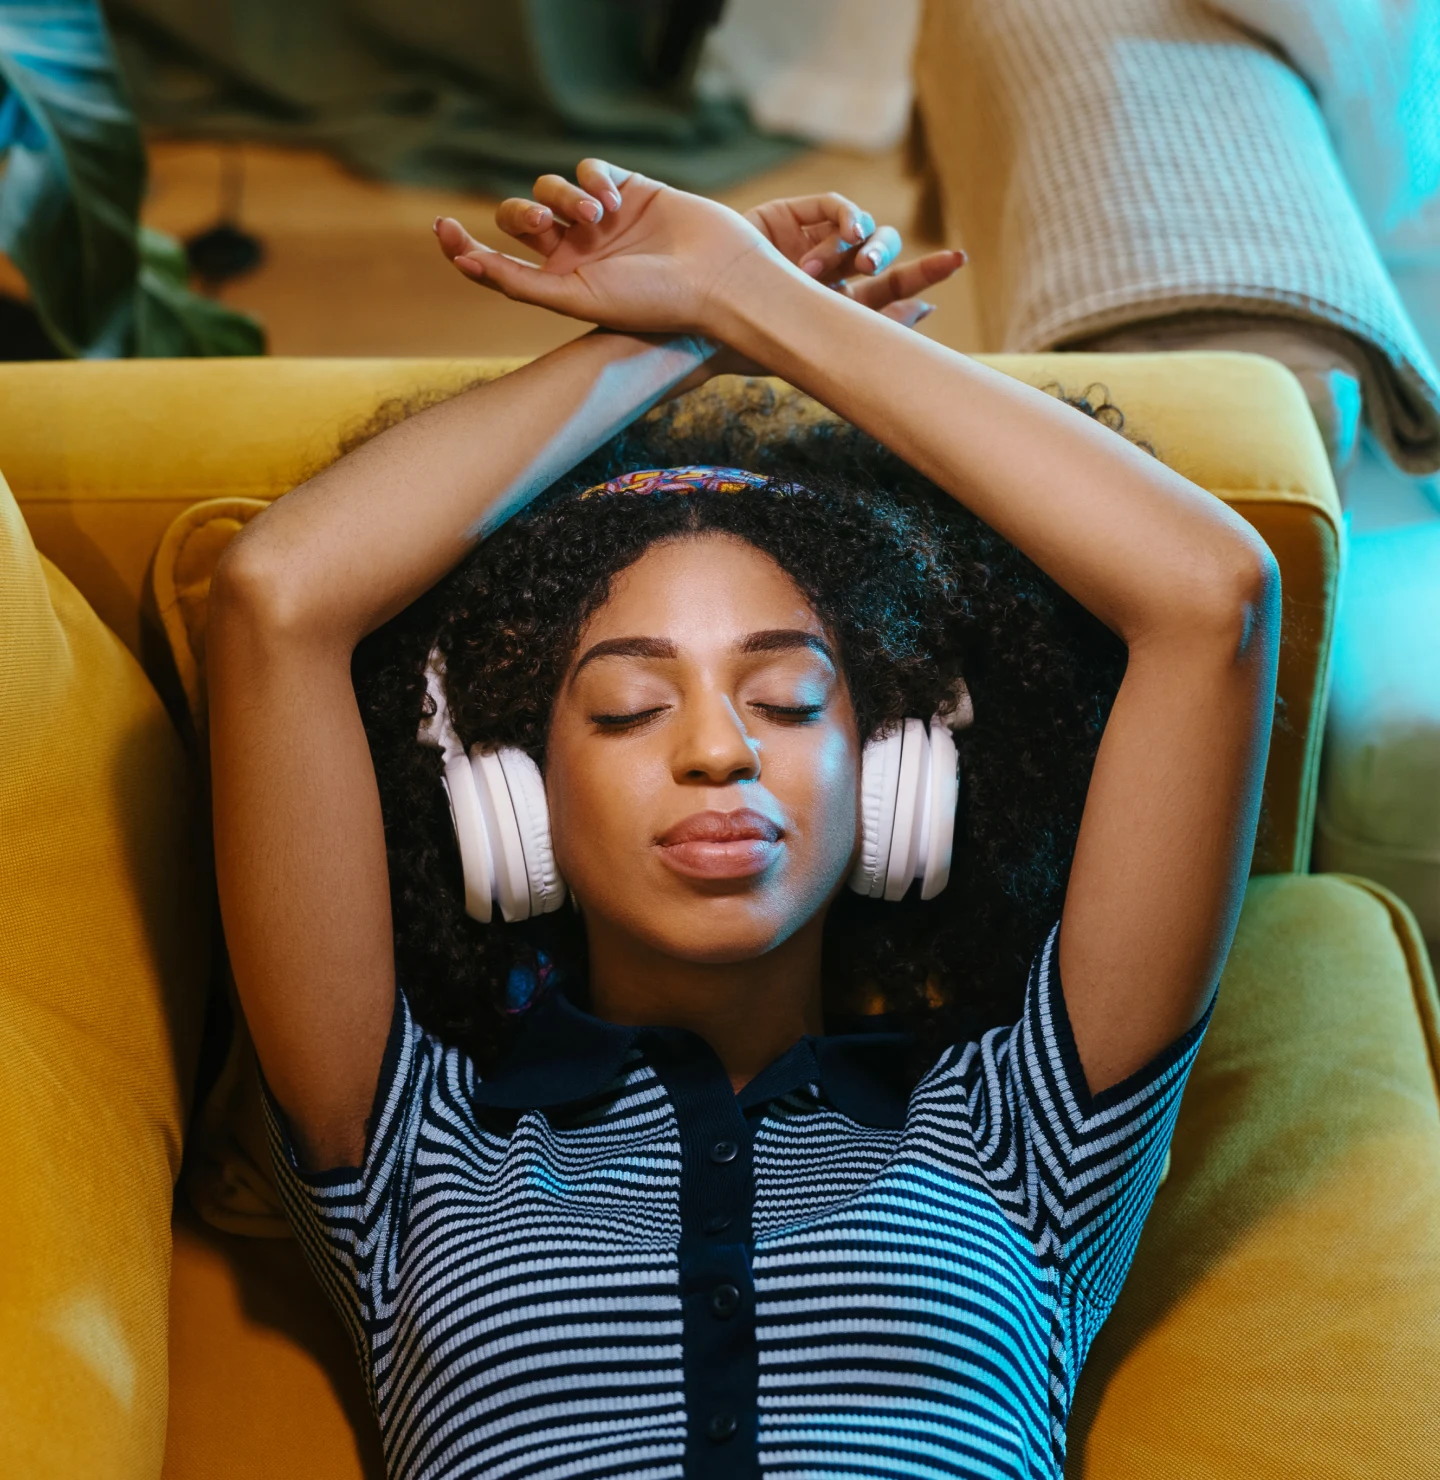 Black woman in a striped navy and light blue, short-sleeved top, eyes closed, wearing white headphones. She lies back on a soft yellow-orange couch, arms resting above her head.